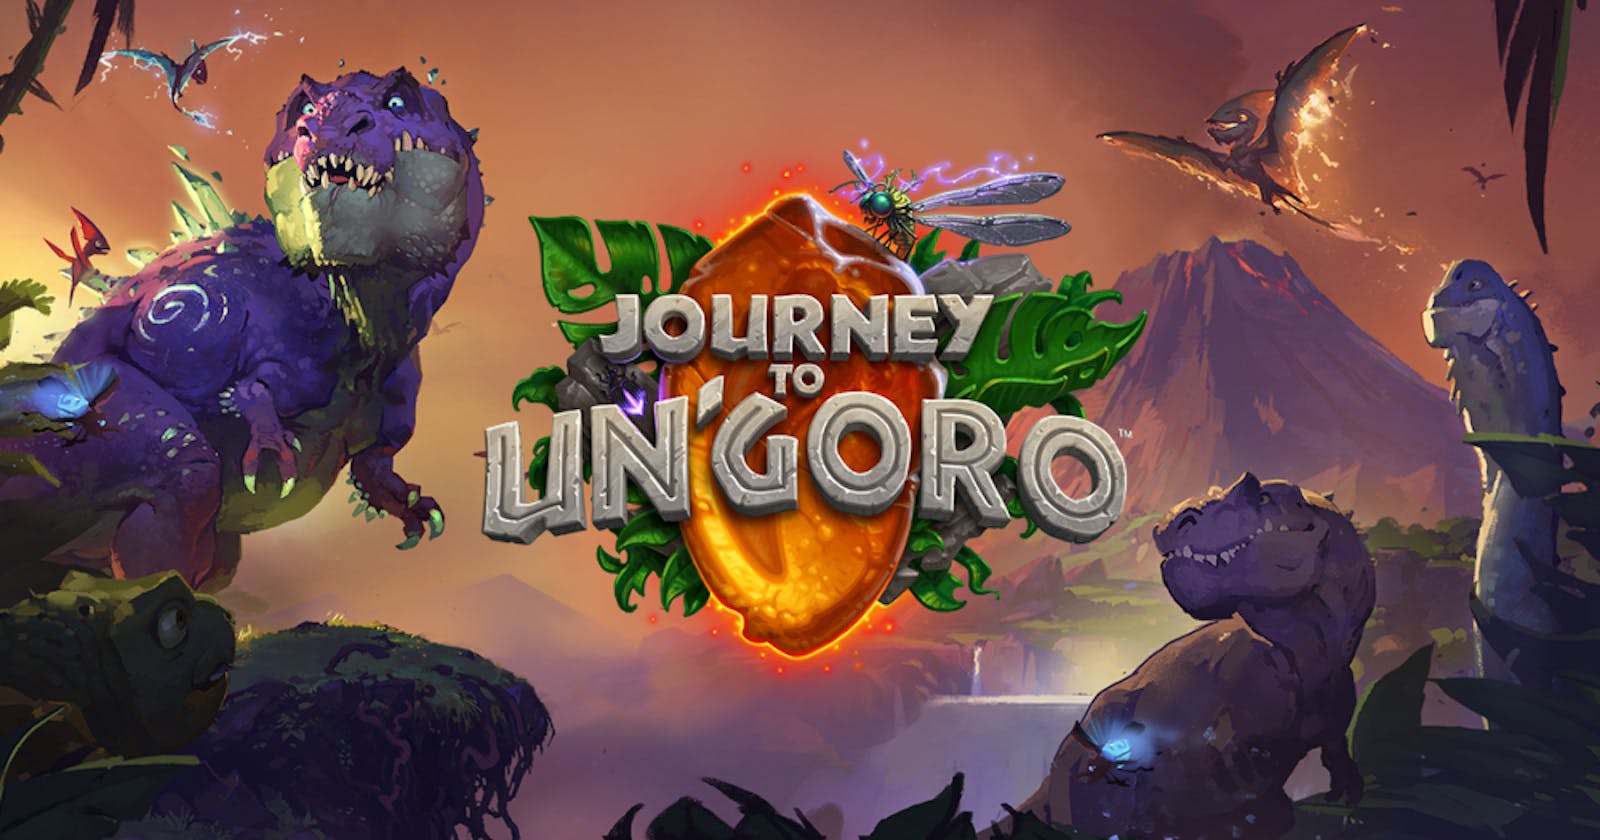 Ben Hearthstone on X: “Did you know Journey to Un'Goro will be